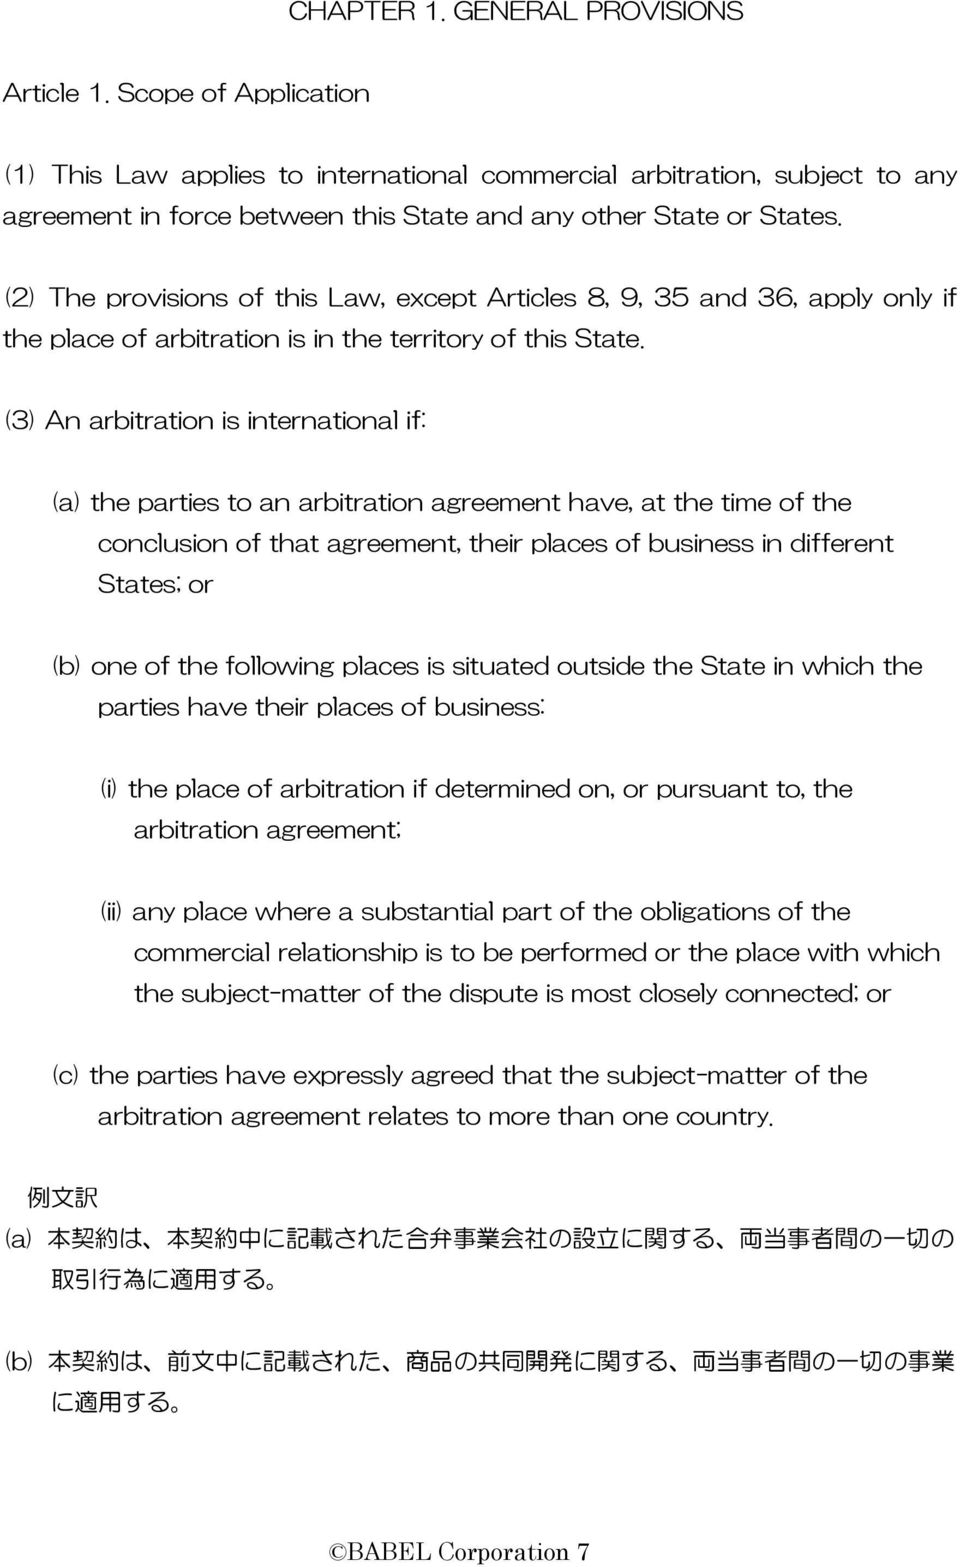 (2) The provisions of this Law, except Articles 8, 9, 35 and 36, apply only if the place of arbitration is in the territory of this State.